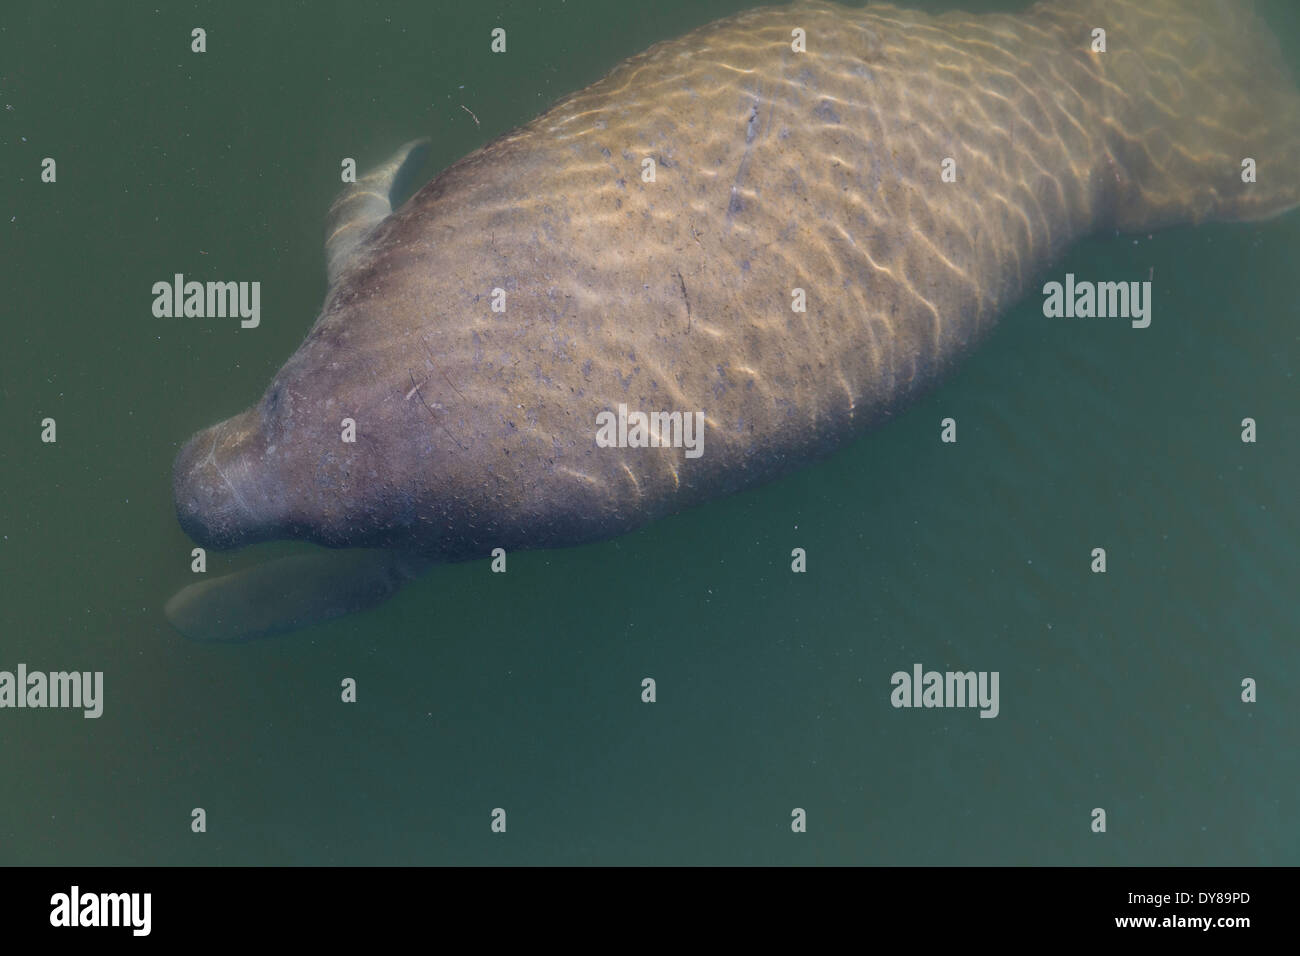 Baby Manatee Just Below the Water Surface, Tampa Bay, FL, USA Stock Photo